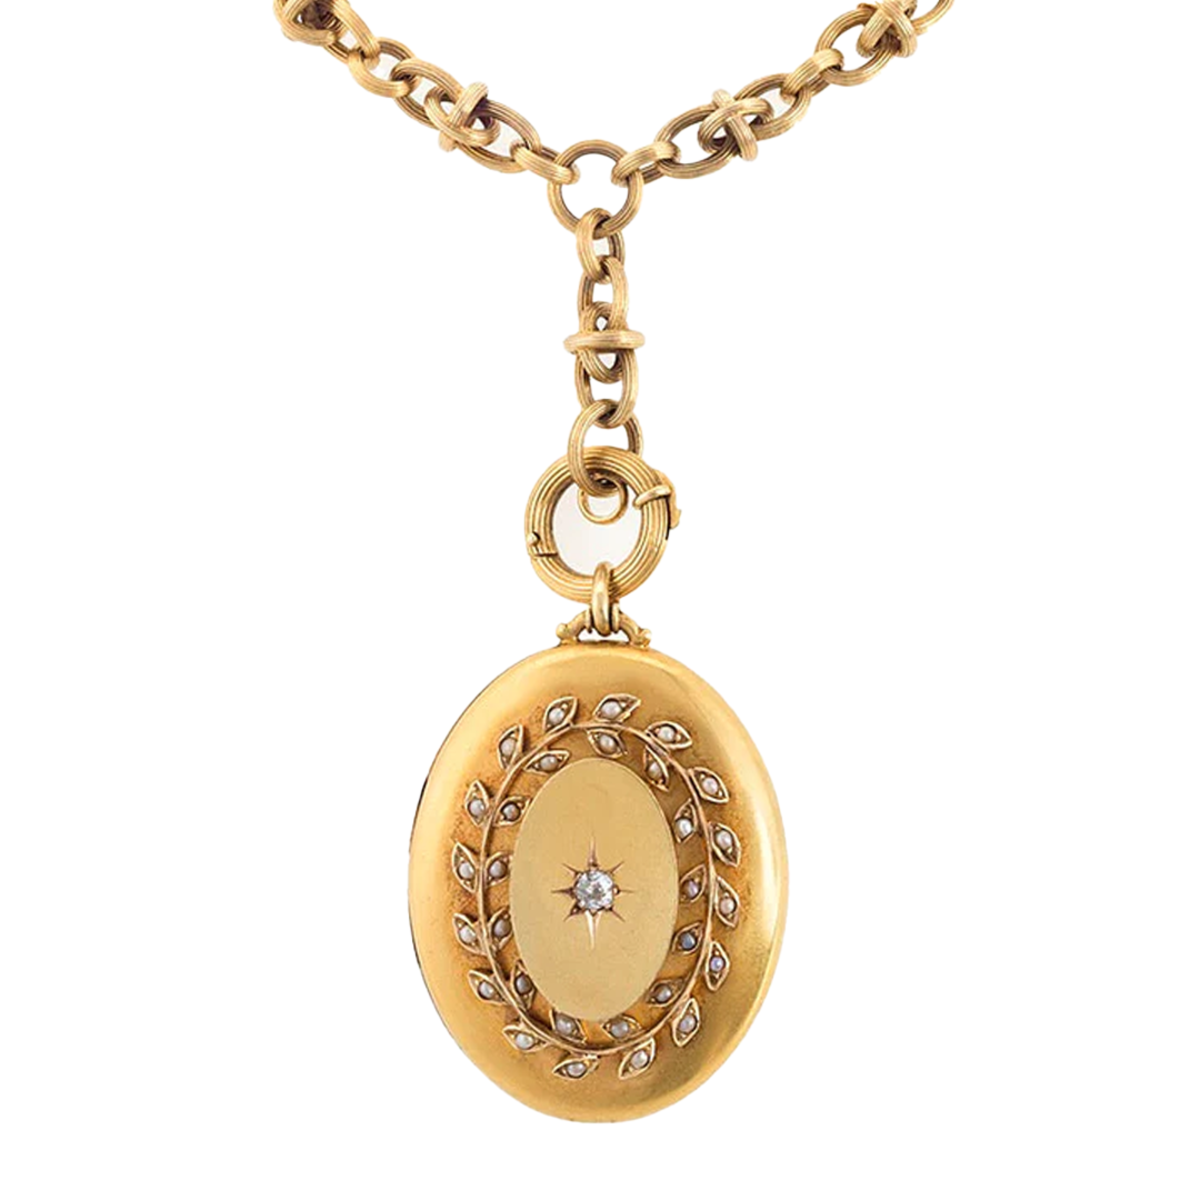 Victorian 18KT Yellow Gold Diamond & Seed Pearl Locket Necklace close-up details